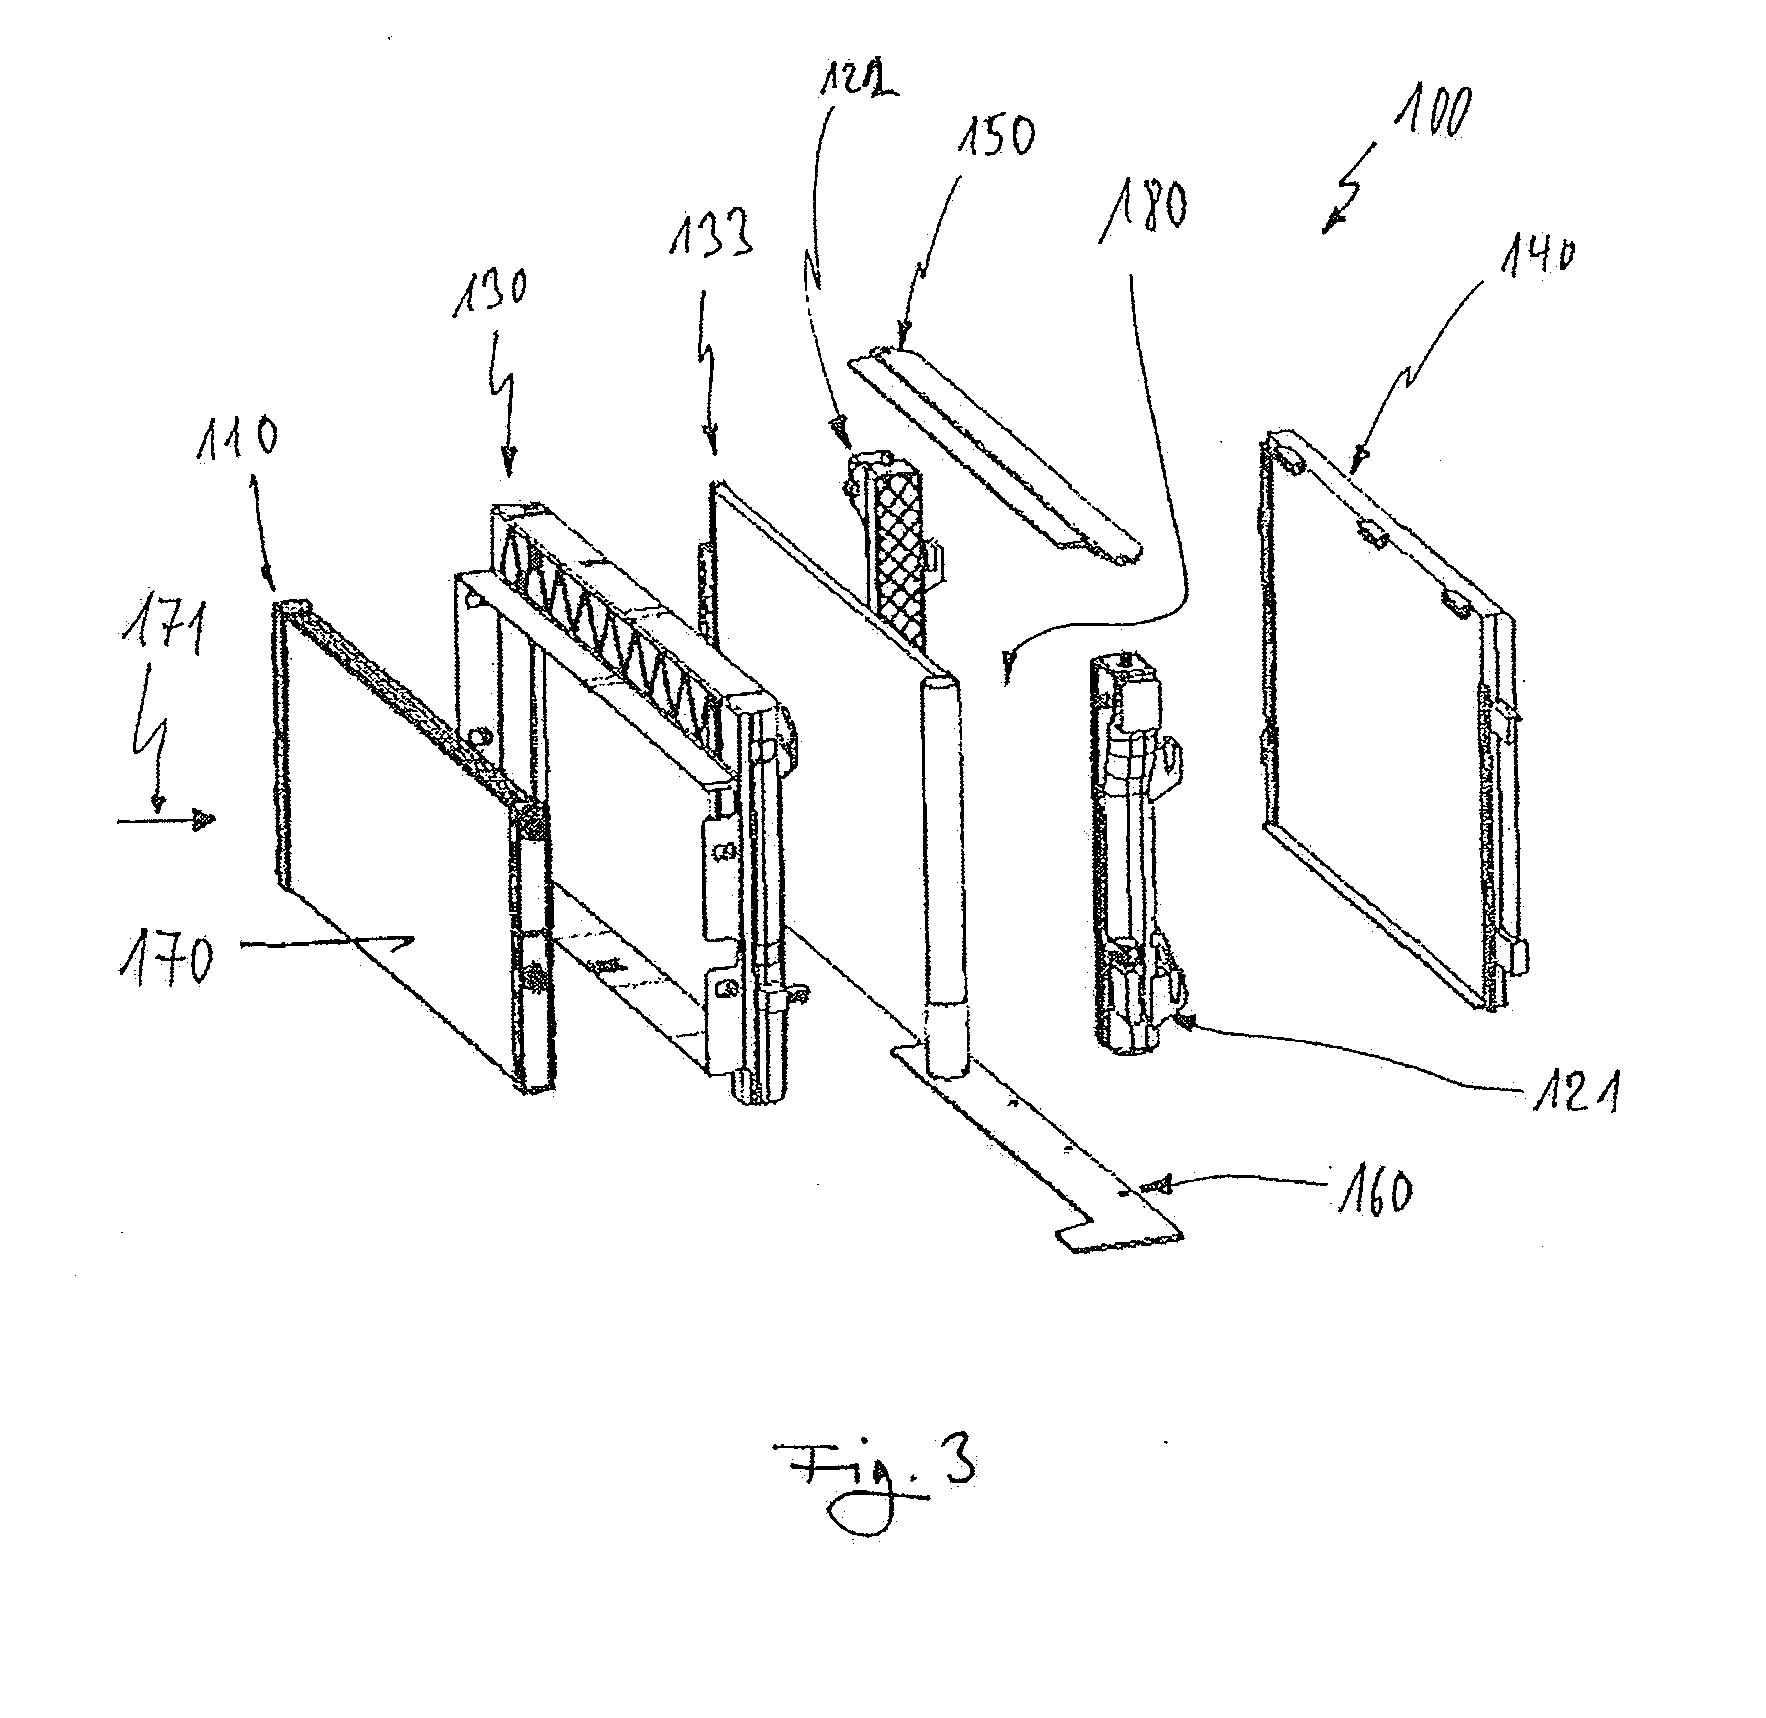 Cooling module and pair of adapters for module standardization